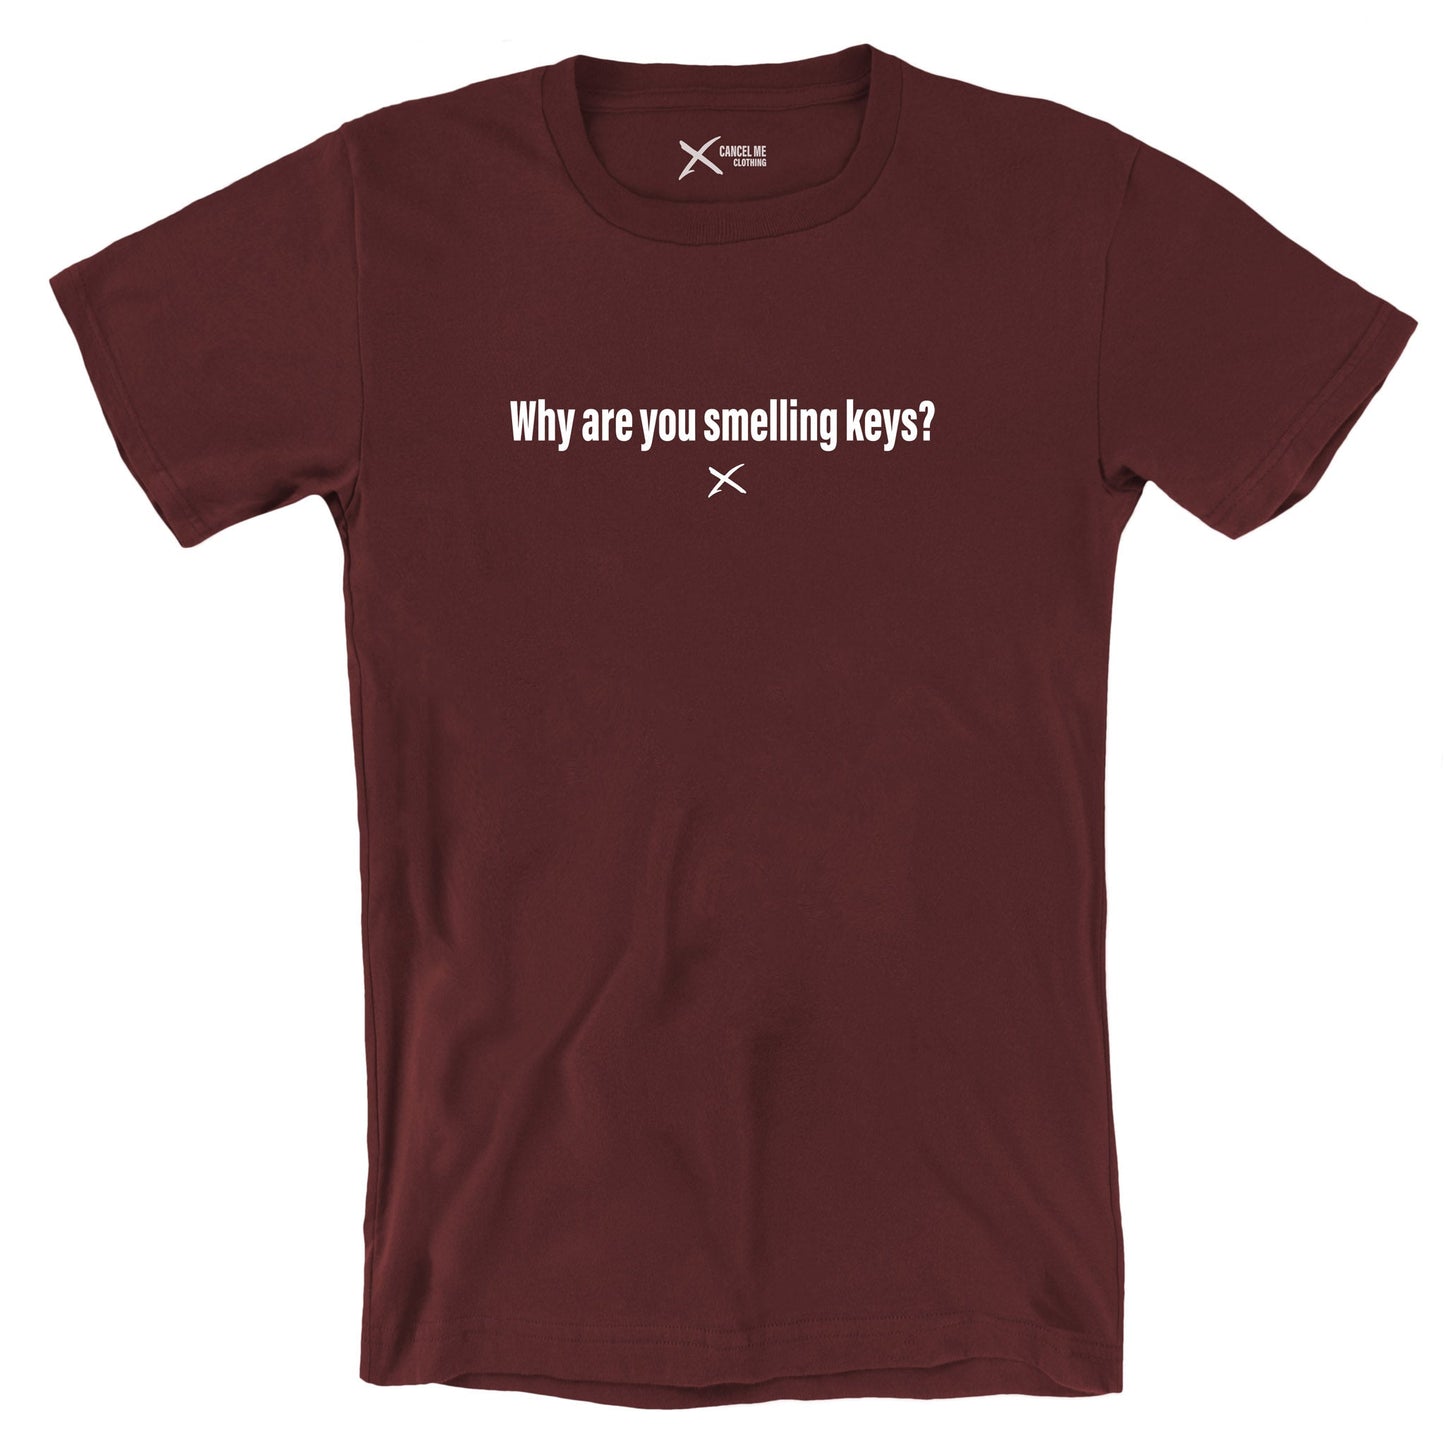 Why are you smelling keys? - Shirt